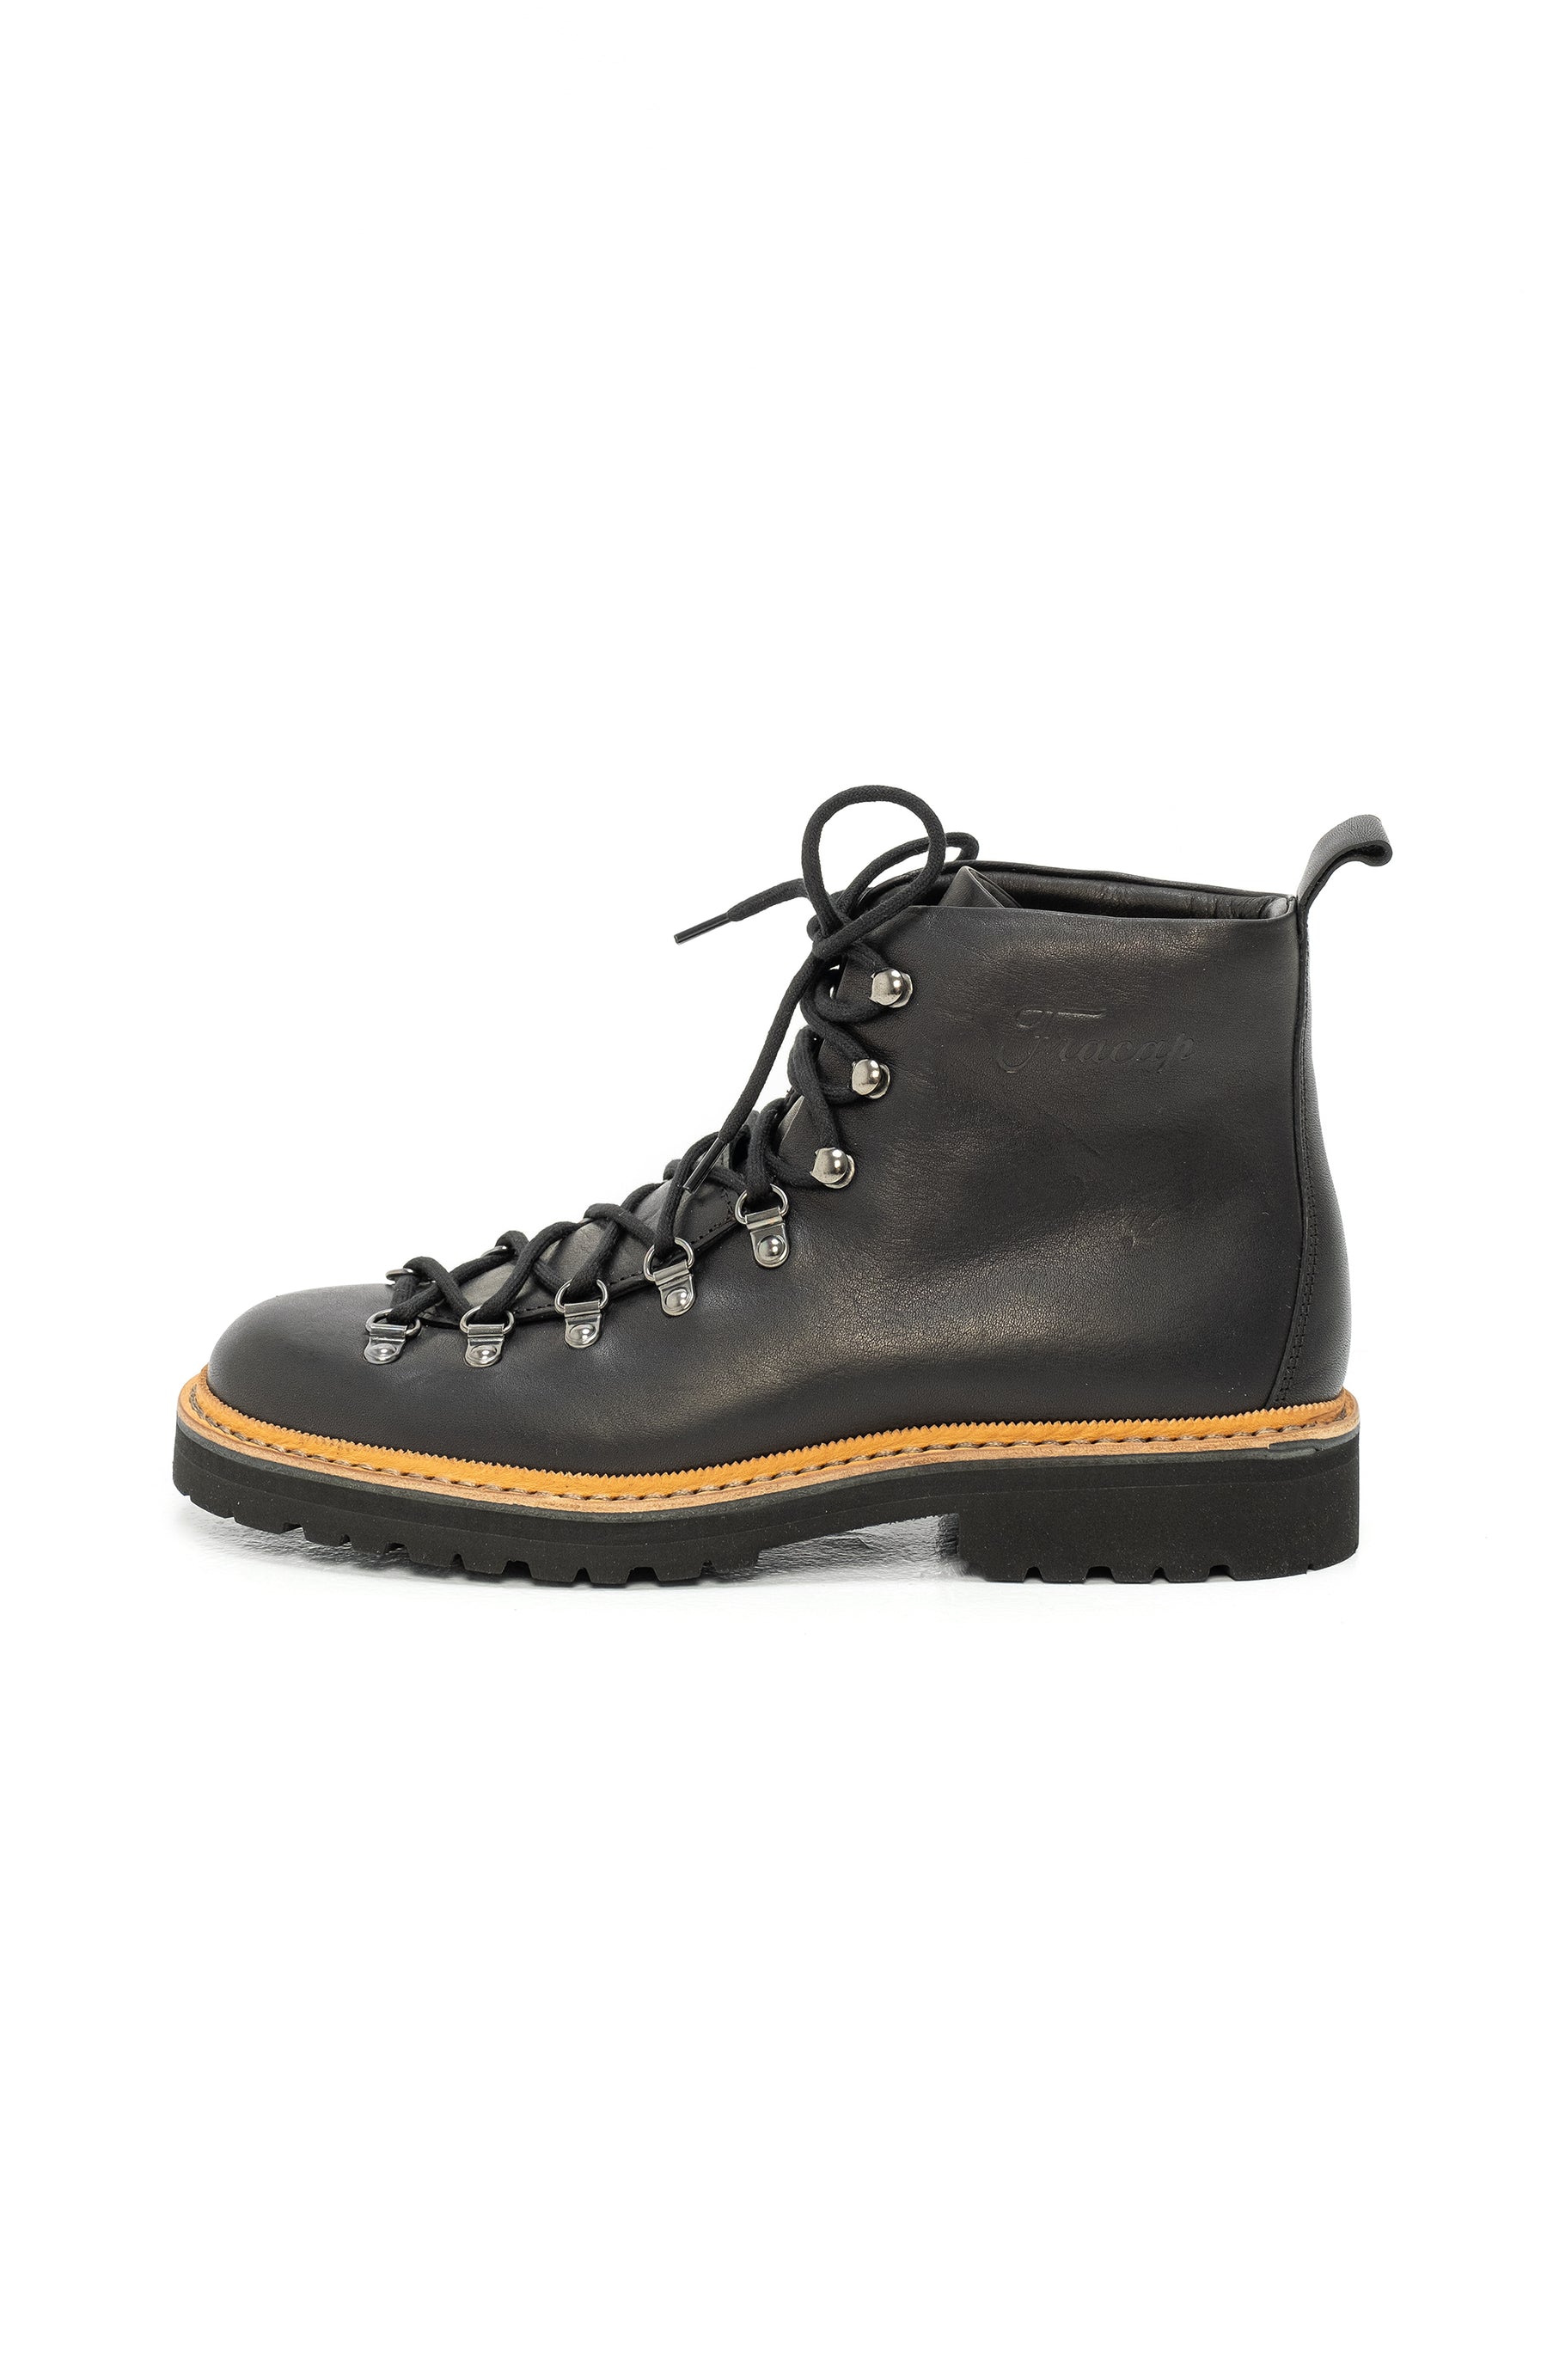 Leather Hiking Boots Mens Fracap - Buy Online